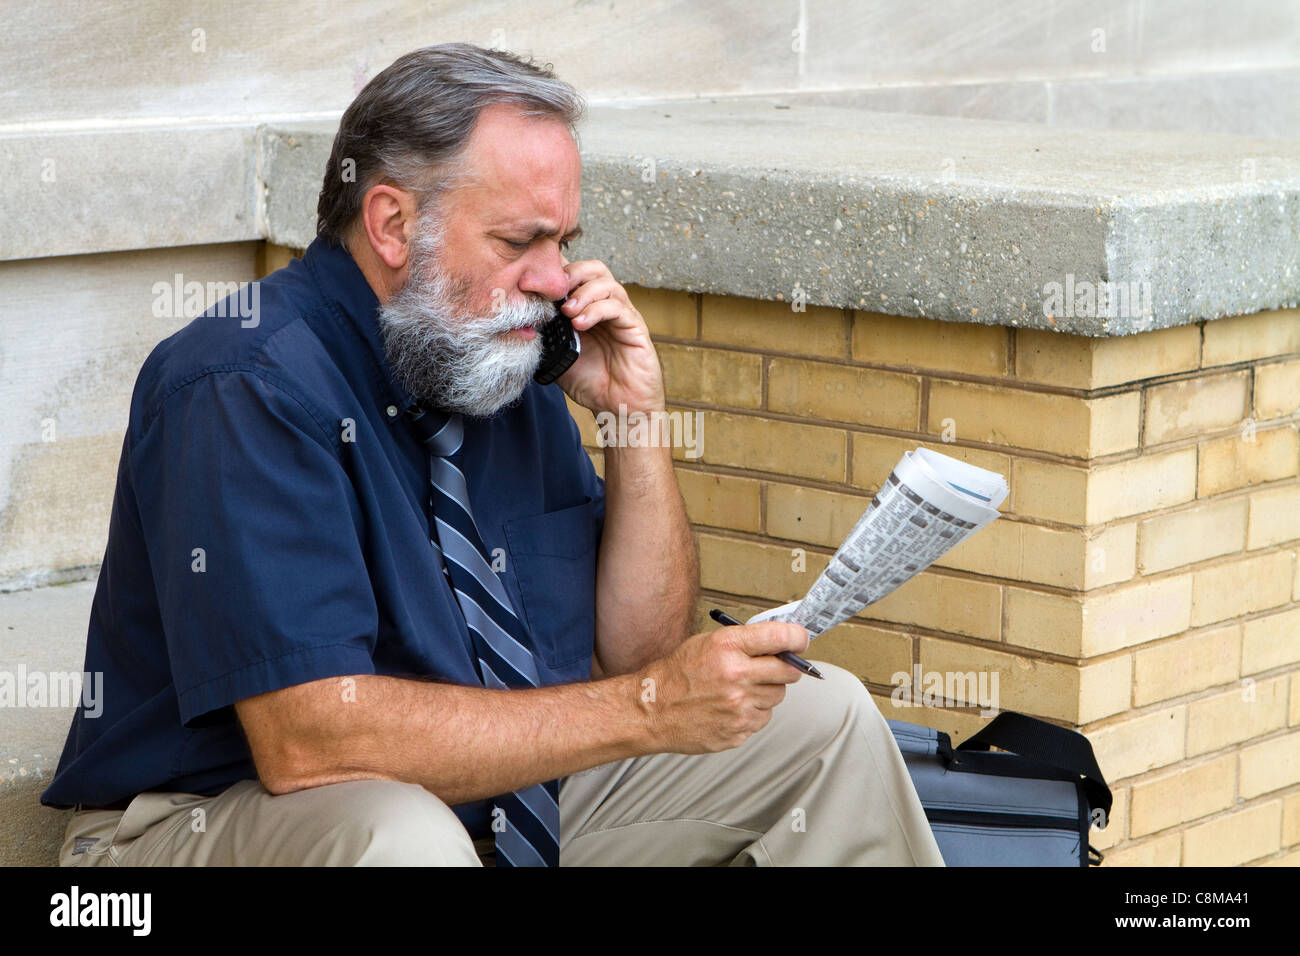 Mature unemployed salesman makes a call on his cell phone to reply to a advertisement for a want ad job in the newspaper. Stock Photo